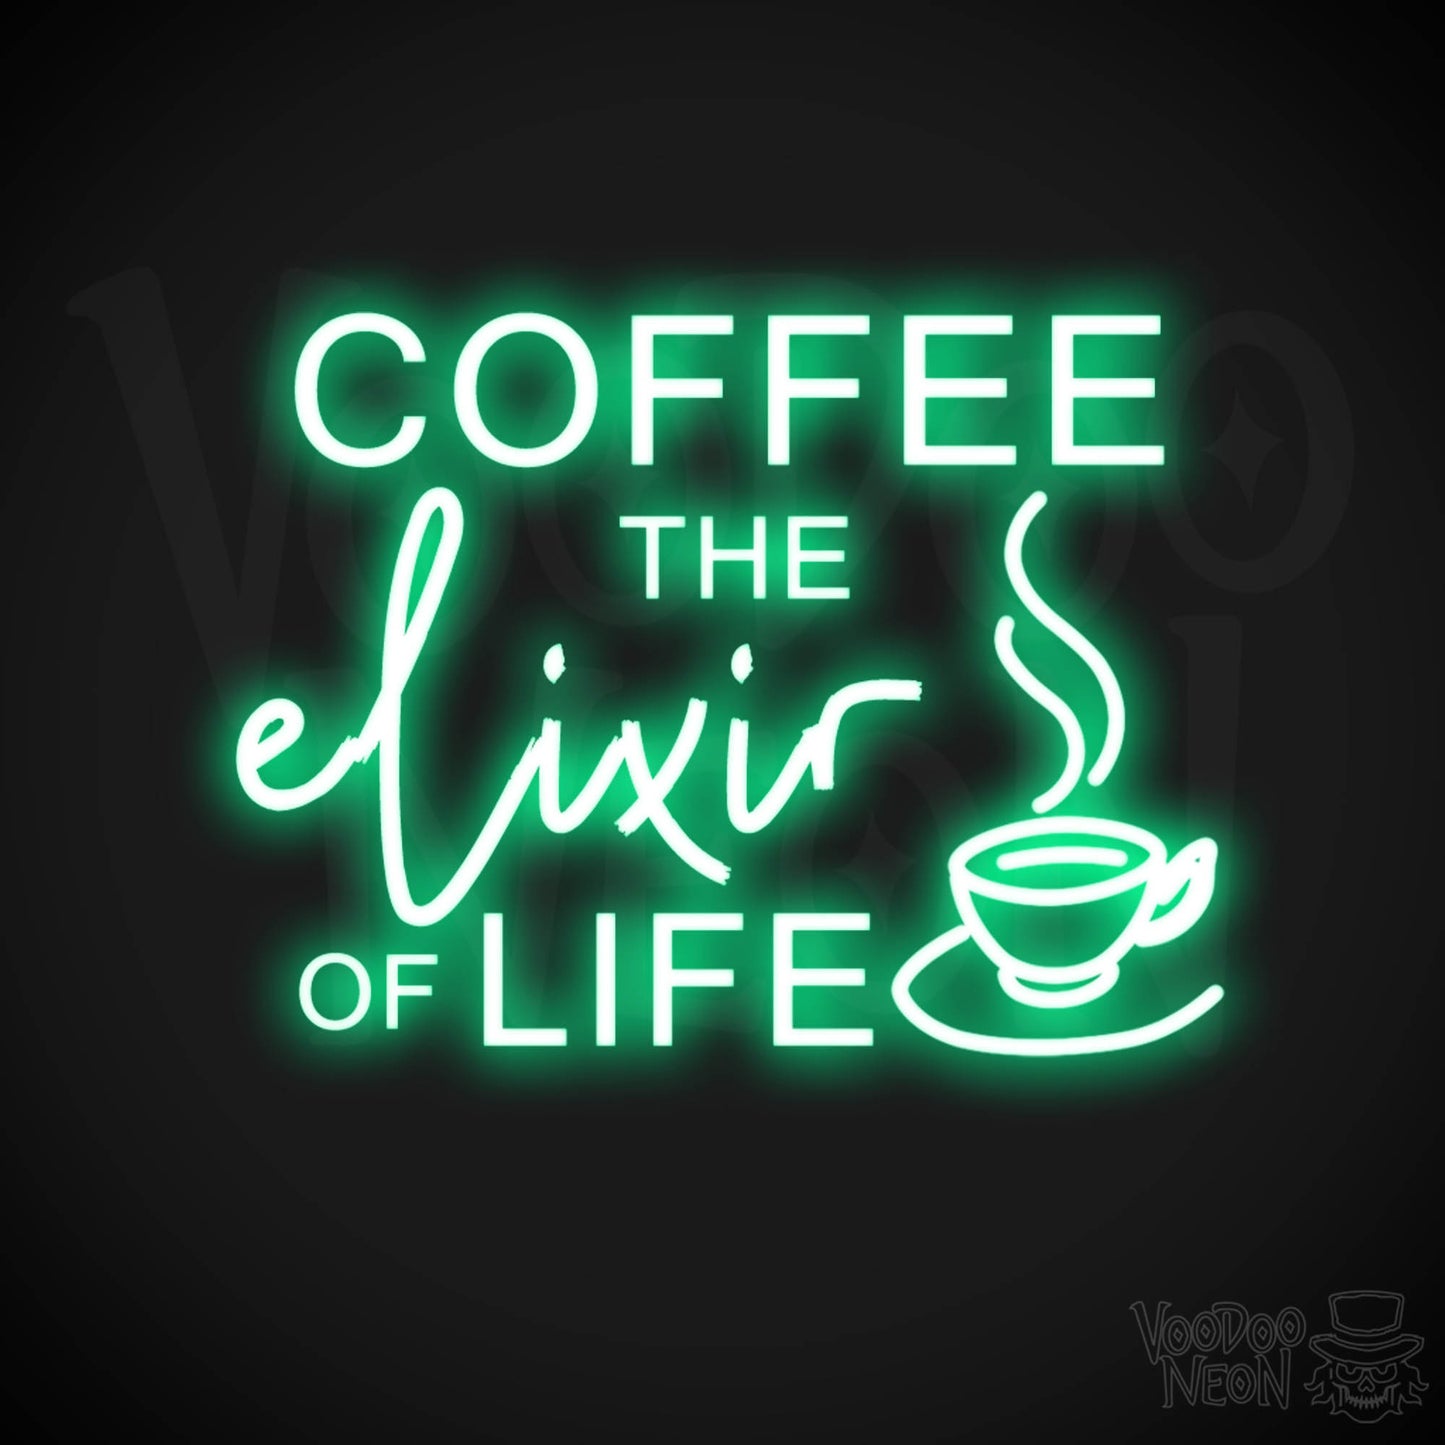 Coffee - The Elixir Of Life Neon Sign - The Elixir Of Life Sign - Color Green